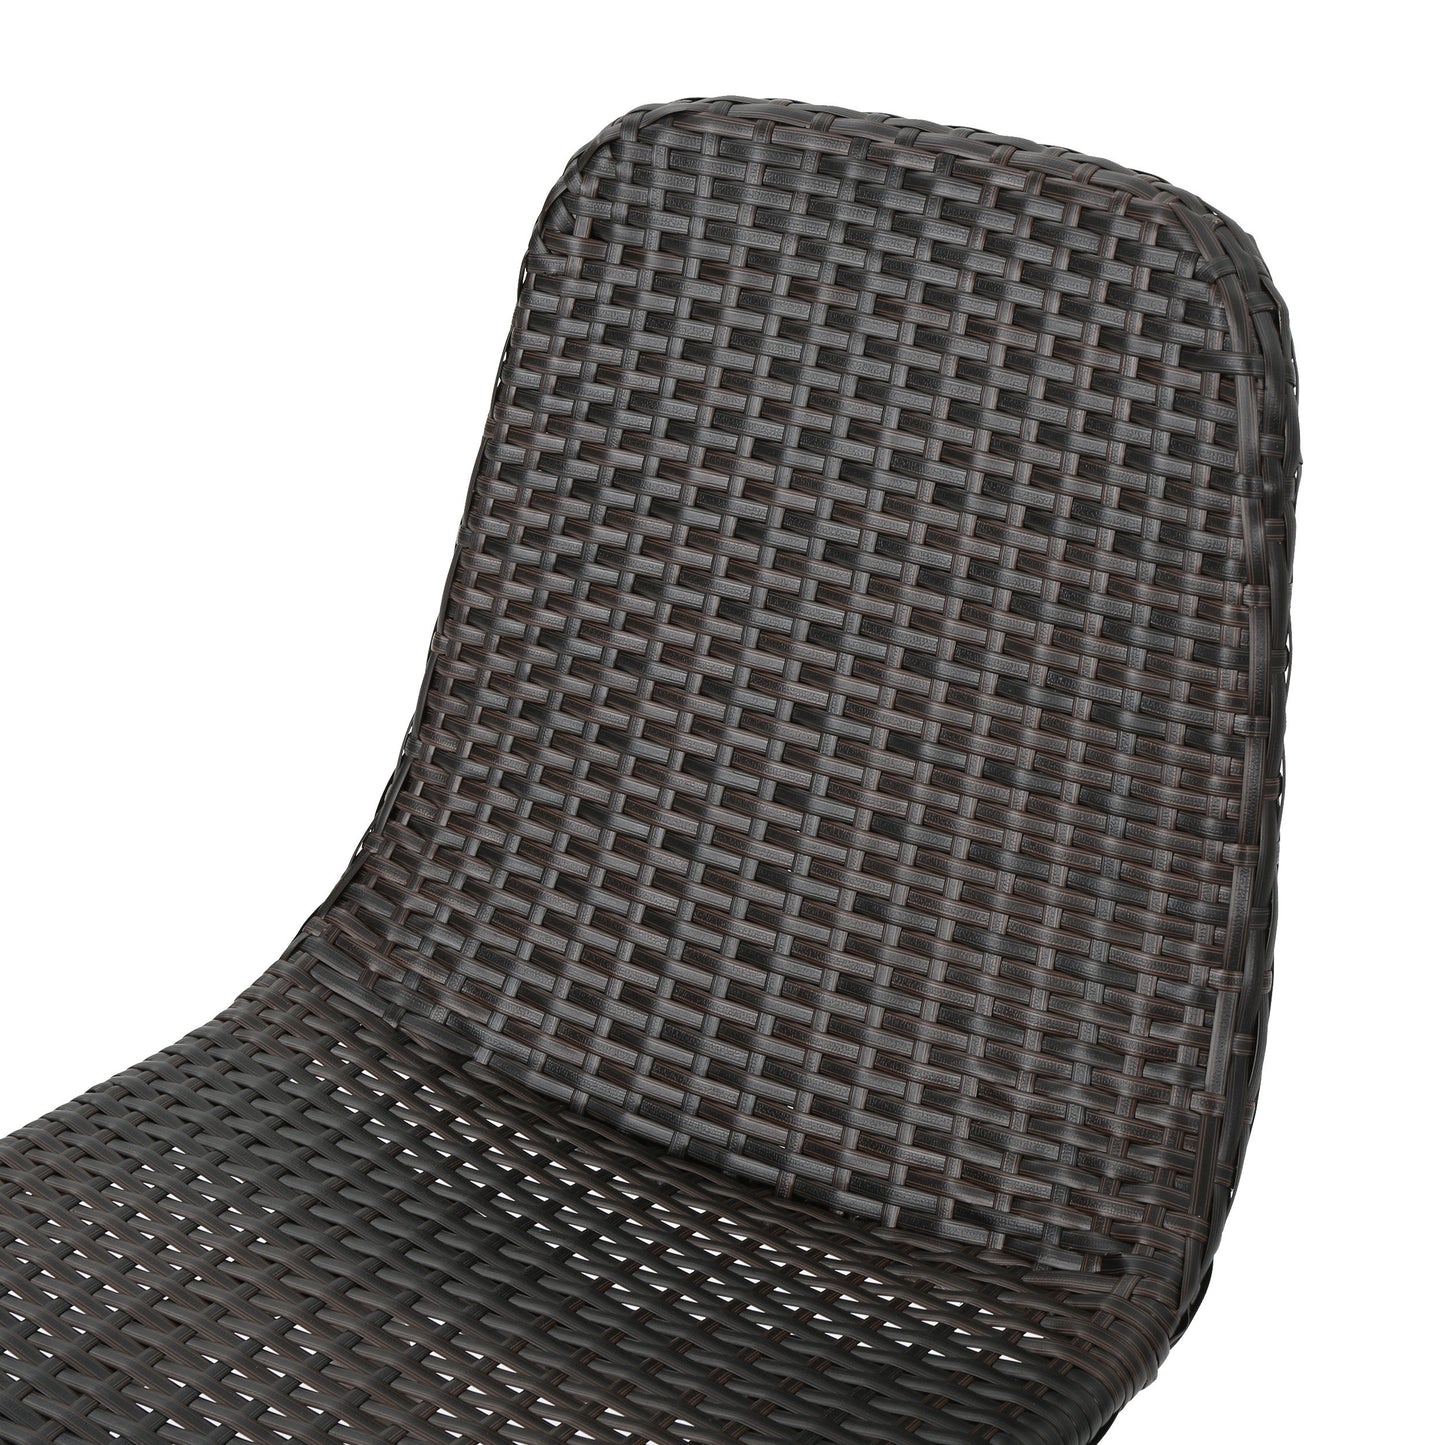 Gilda Outdoor Multibrown Wicker Dining Chairs with Dark Brown Powder Coated Legs